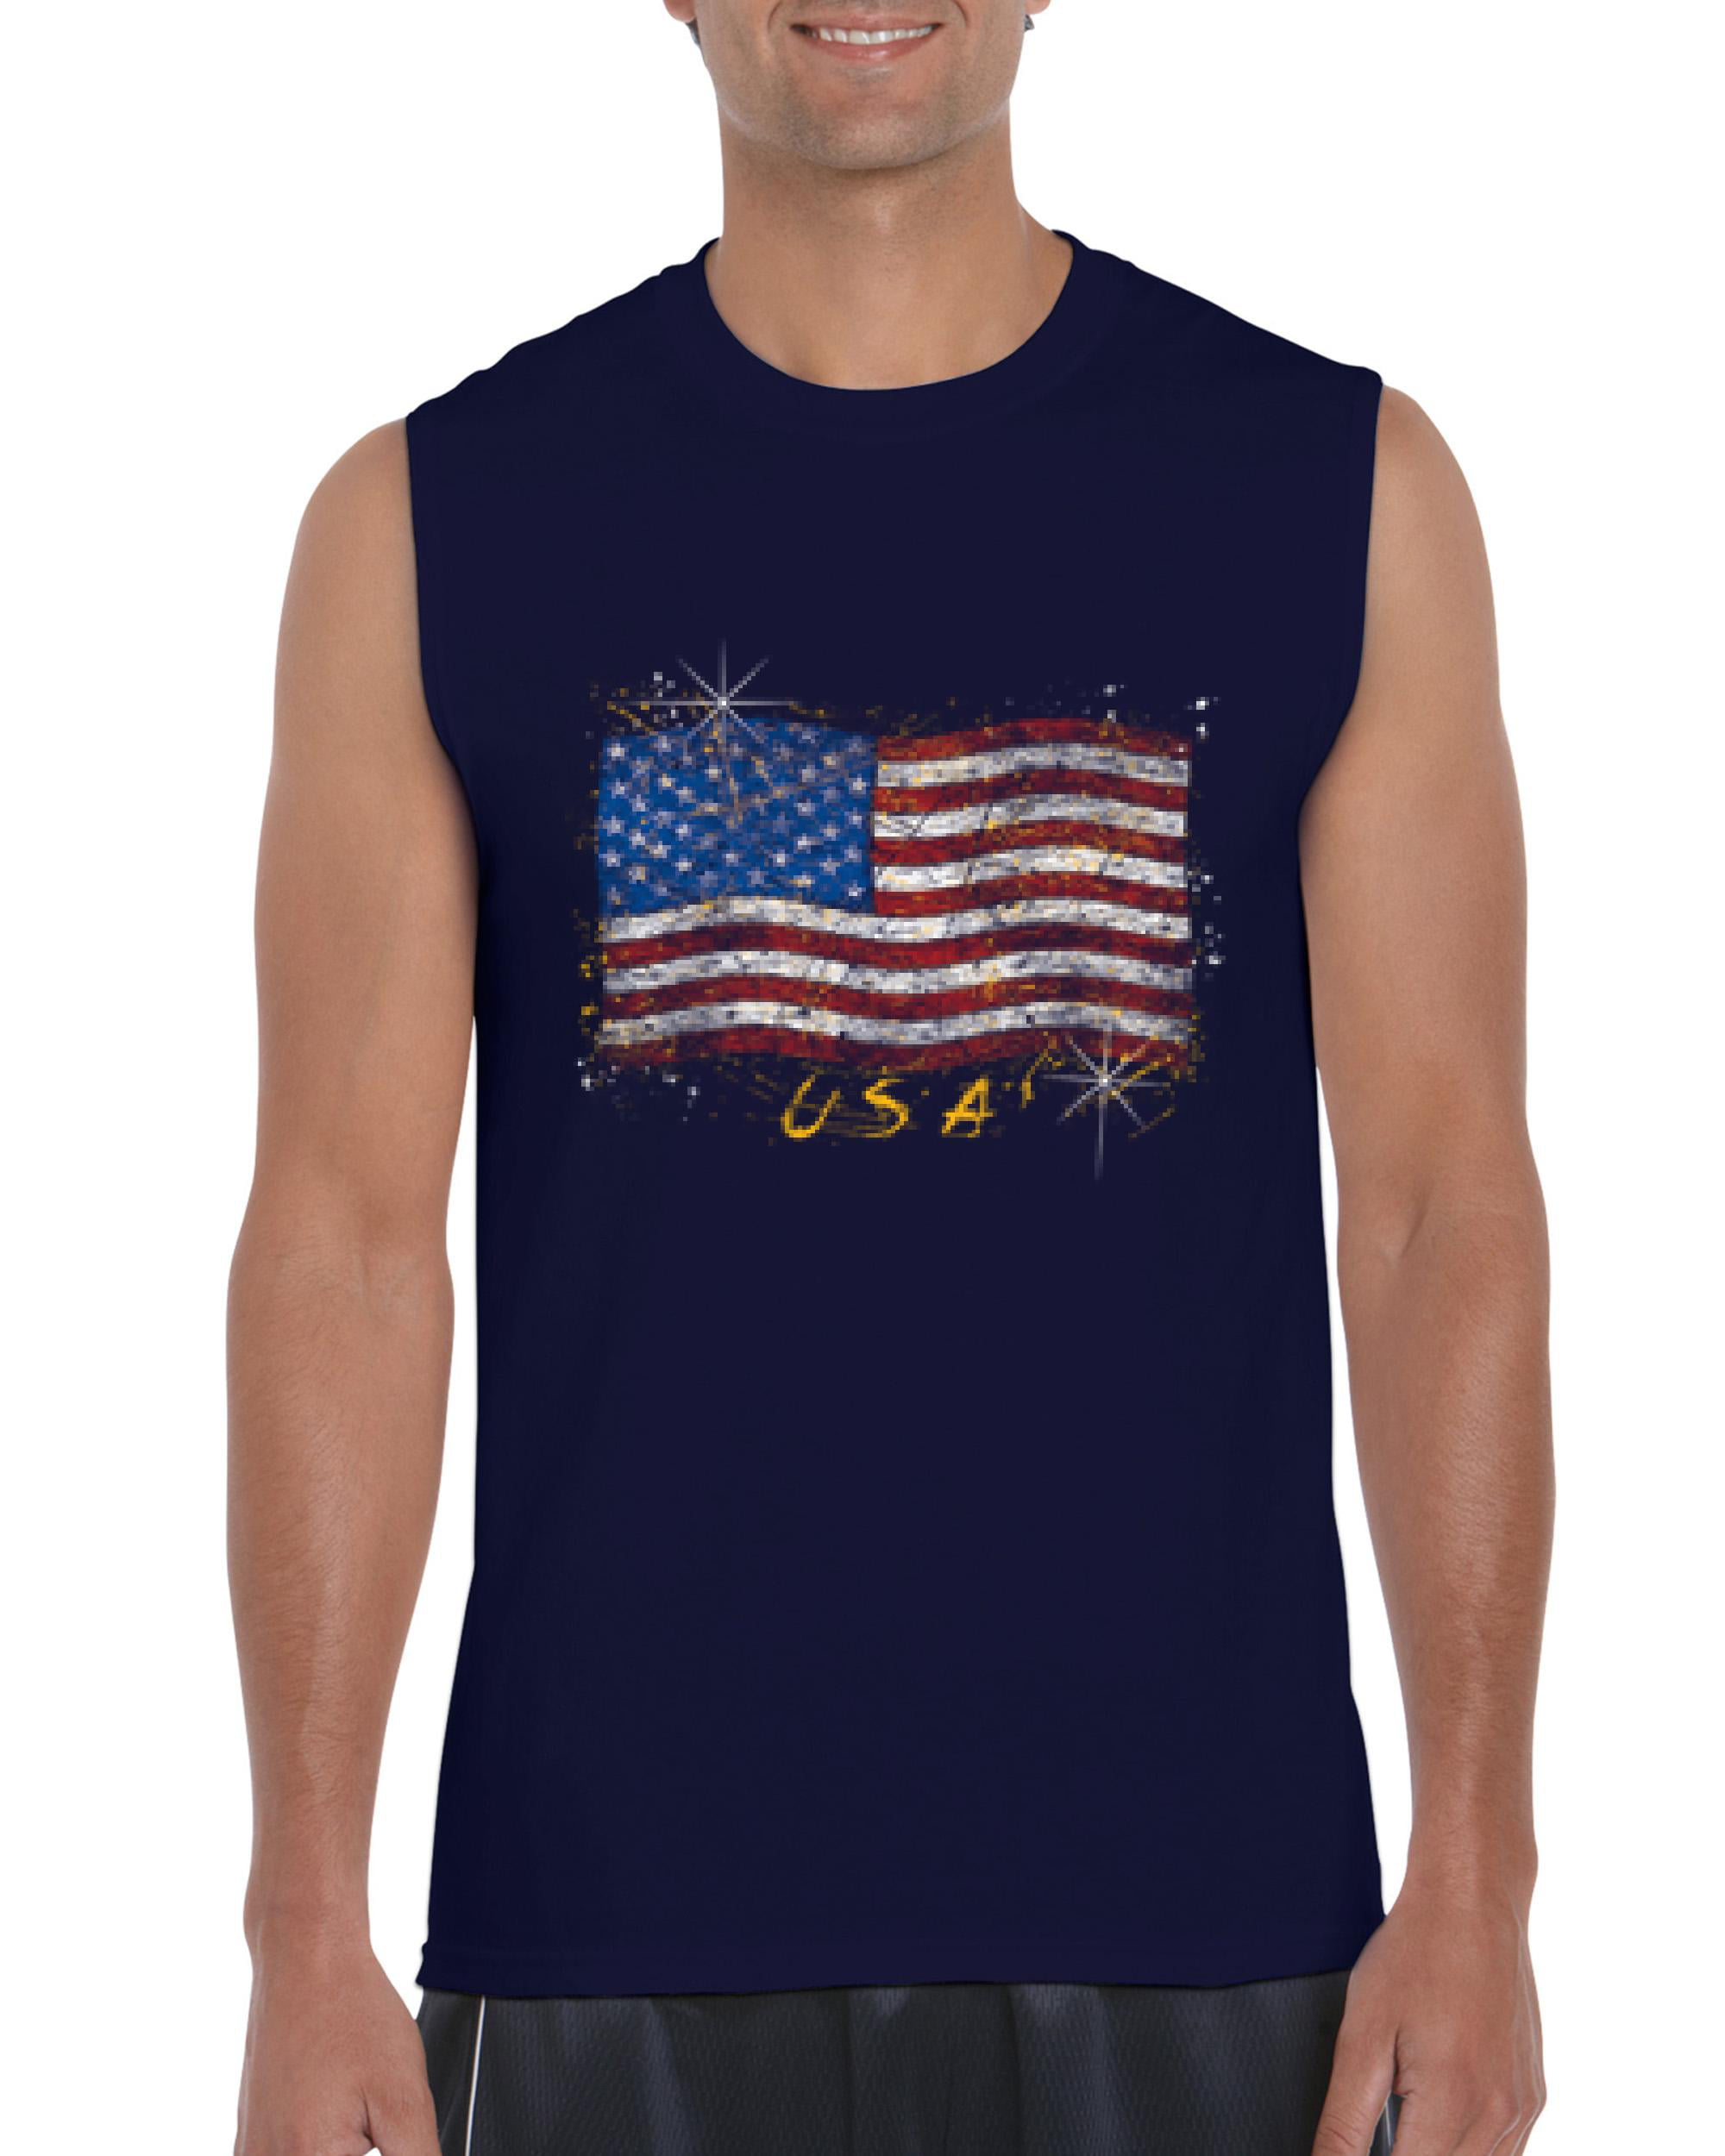 IWPF - Men's Graphic T-Shirt Sleeveless - American Flag USA in Gold ...